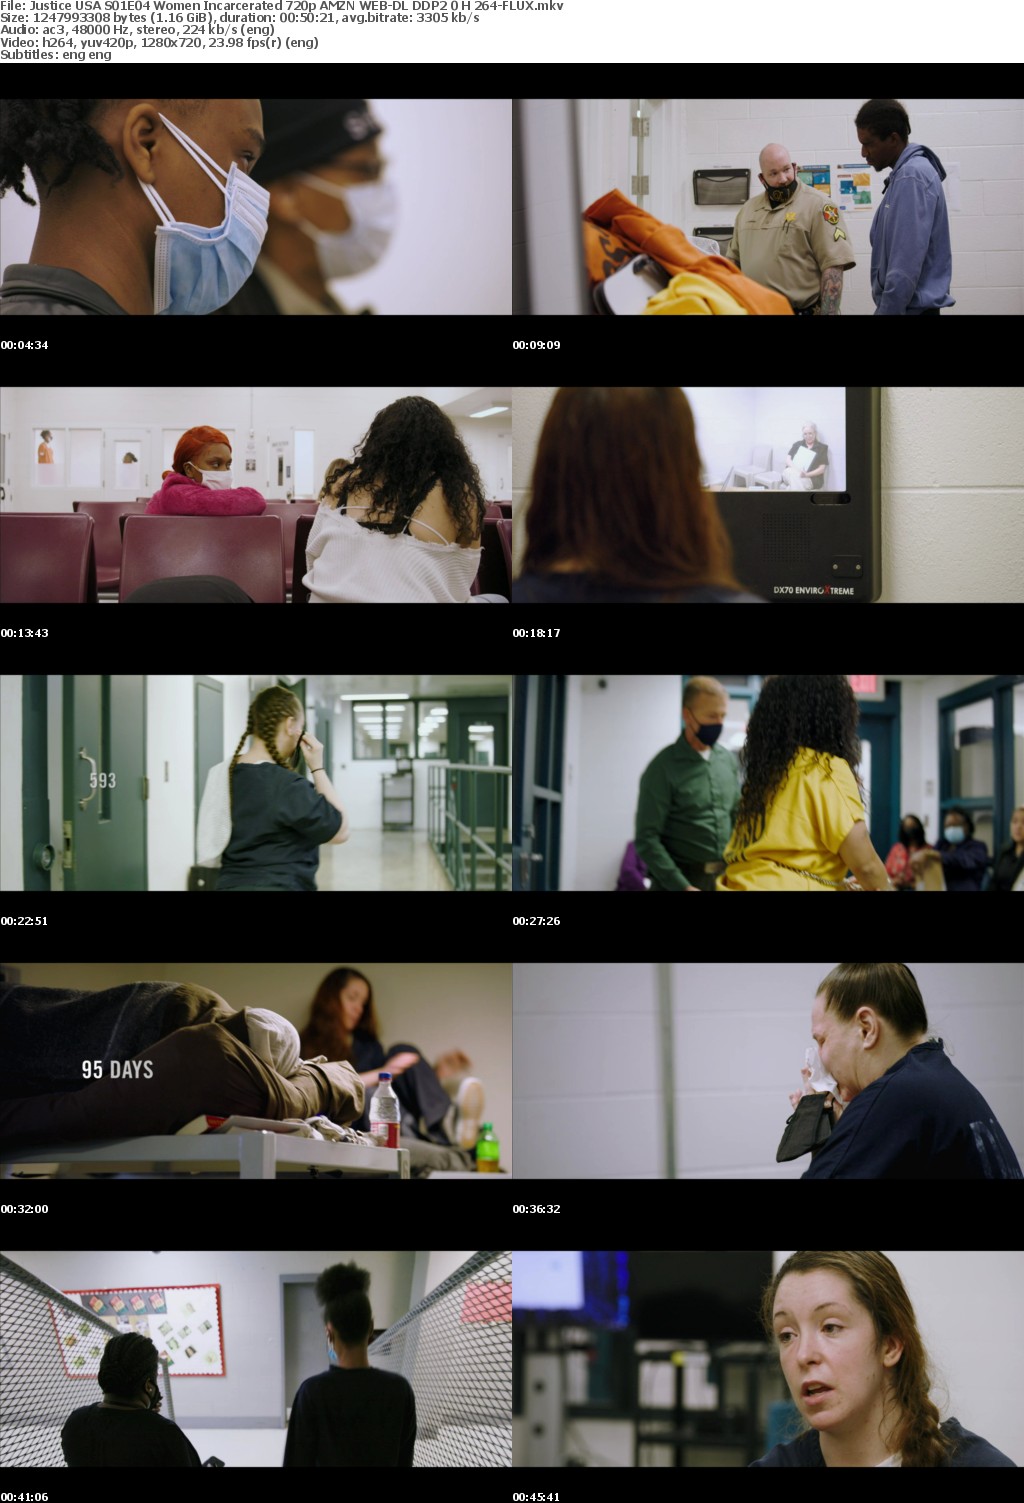 Justice USA S01E04 Women Incarcerated 720p AMZN WEB-DL DDP2 0 H 264-FLUX